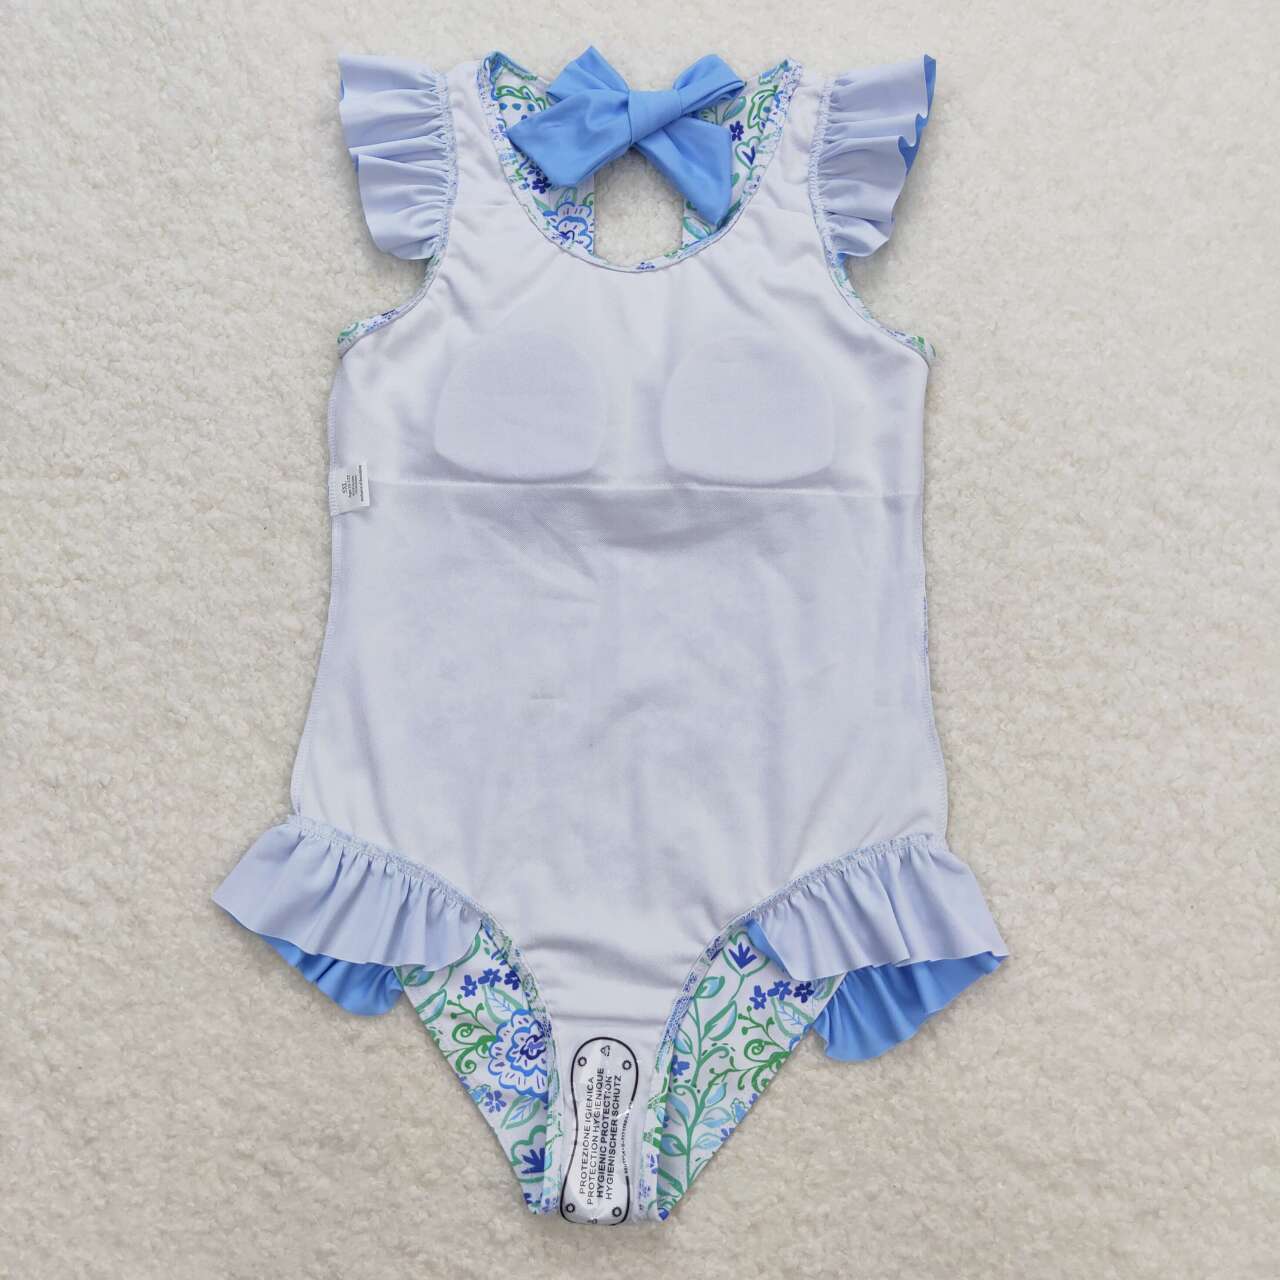 S0278 Floral blue and white lace one-piece swimsuit